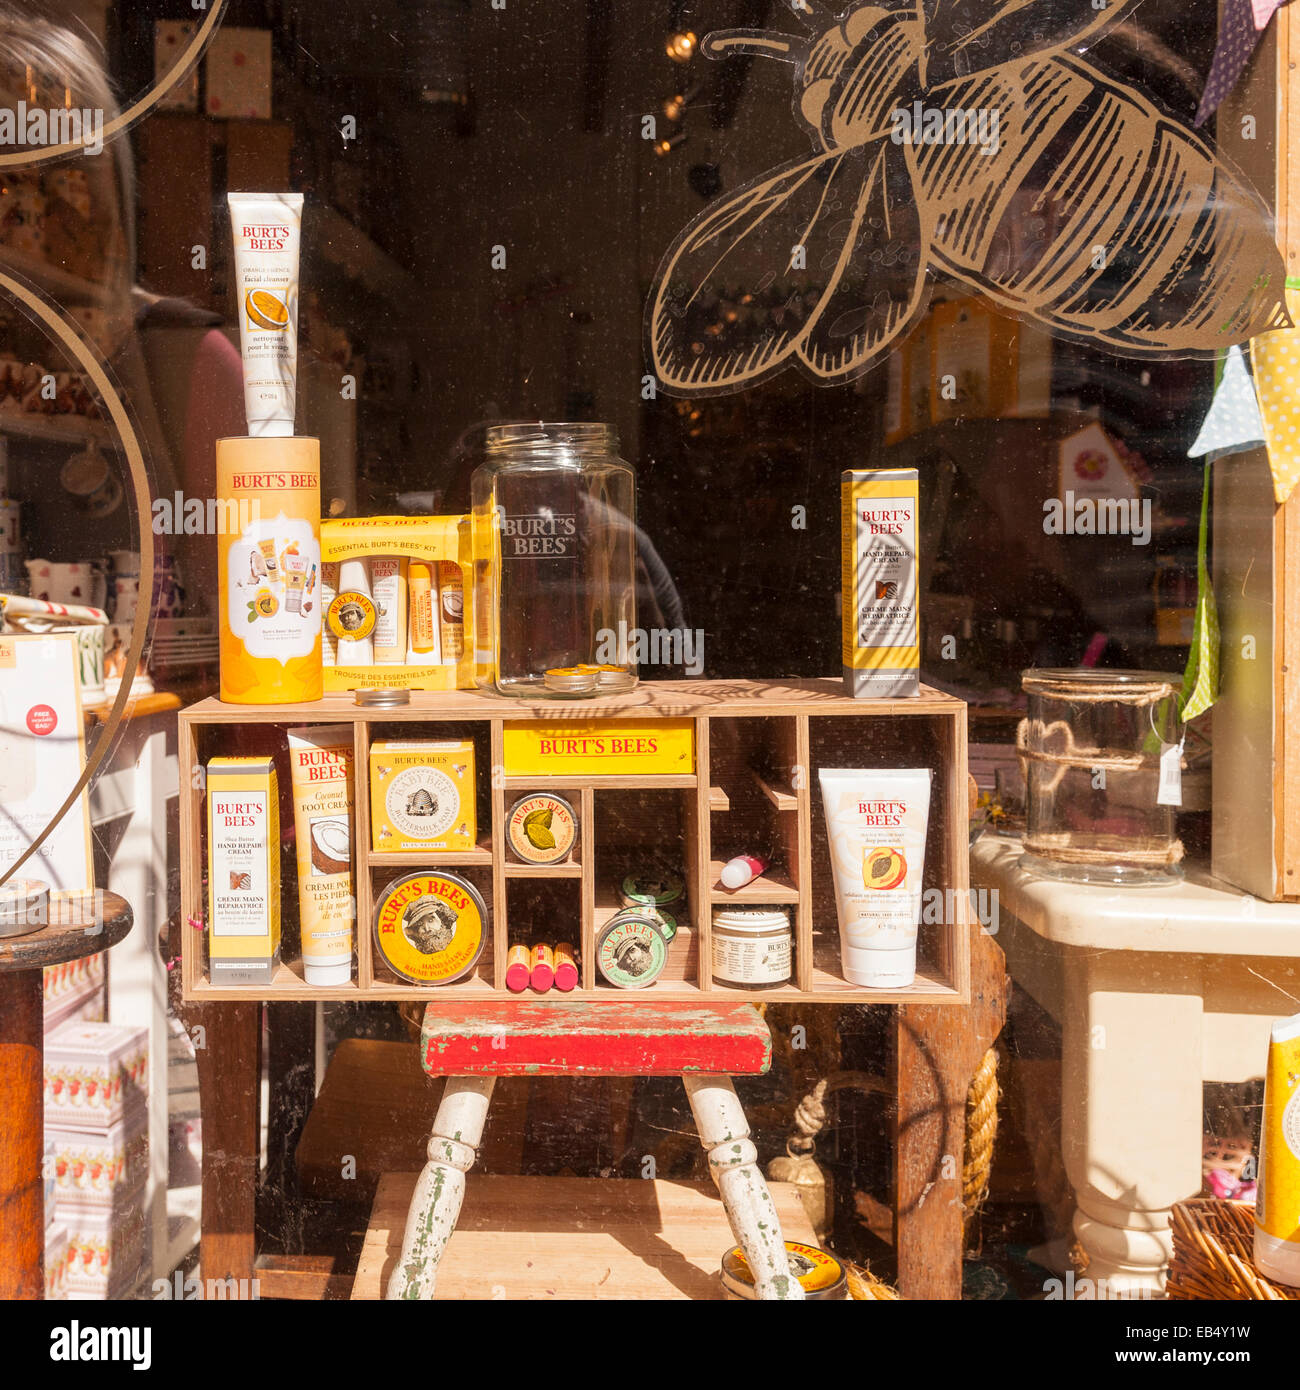 A window display showing Burt's Bees products through a dirty window in the Uk Stock Photo